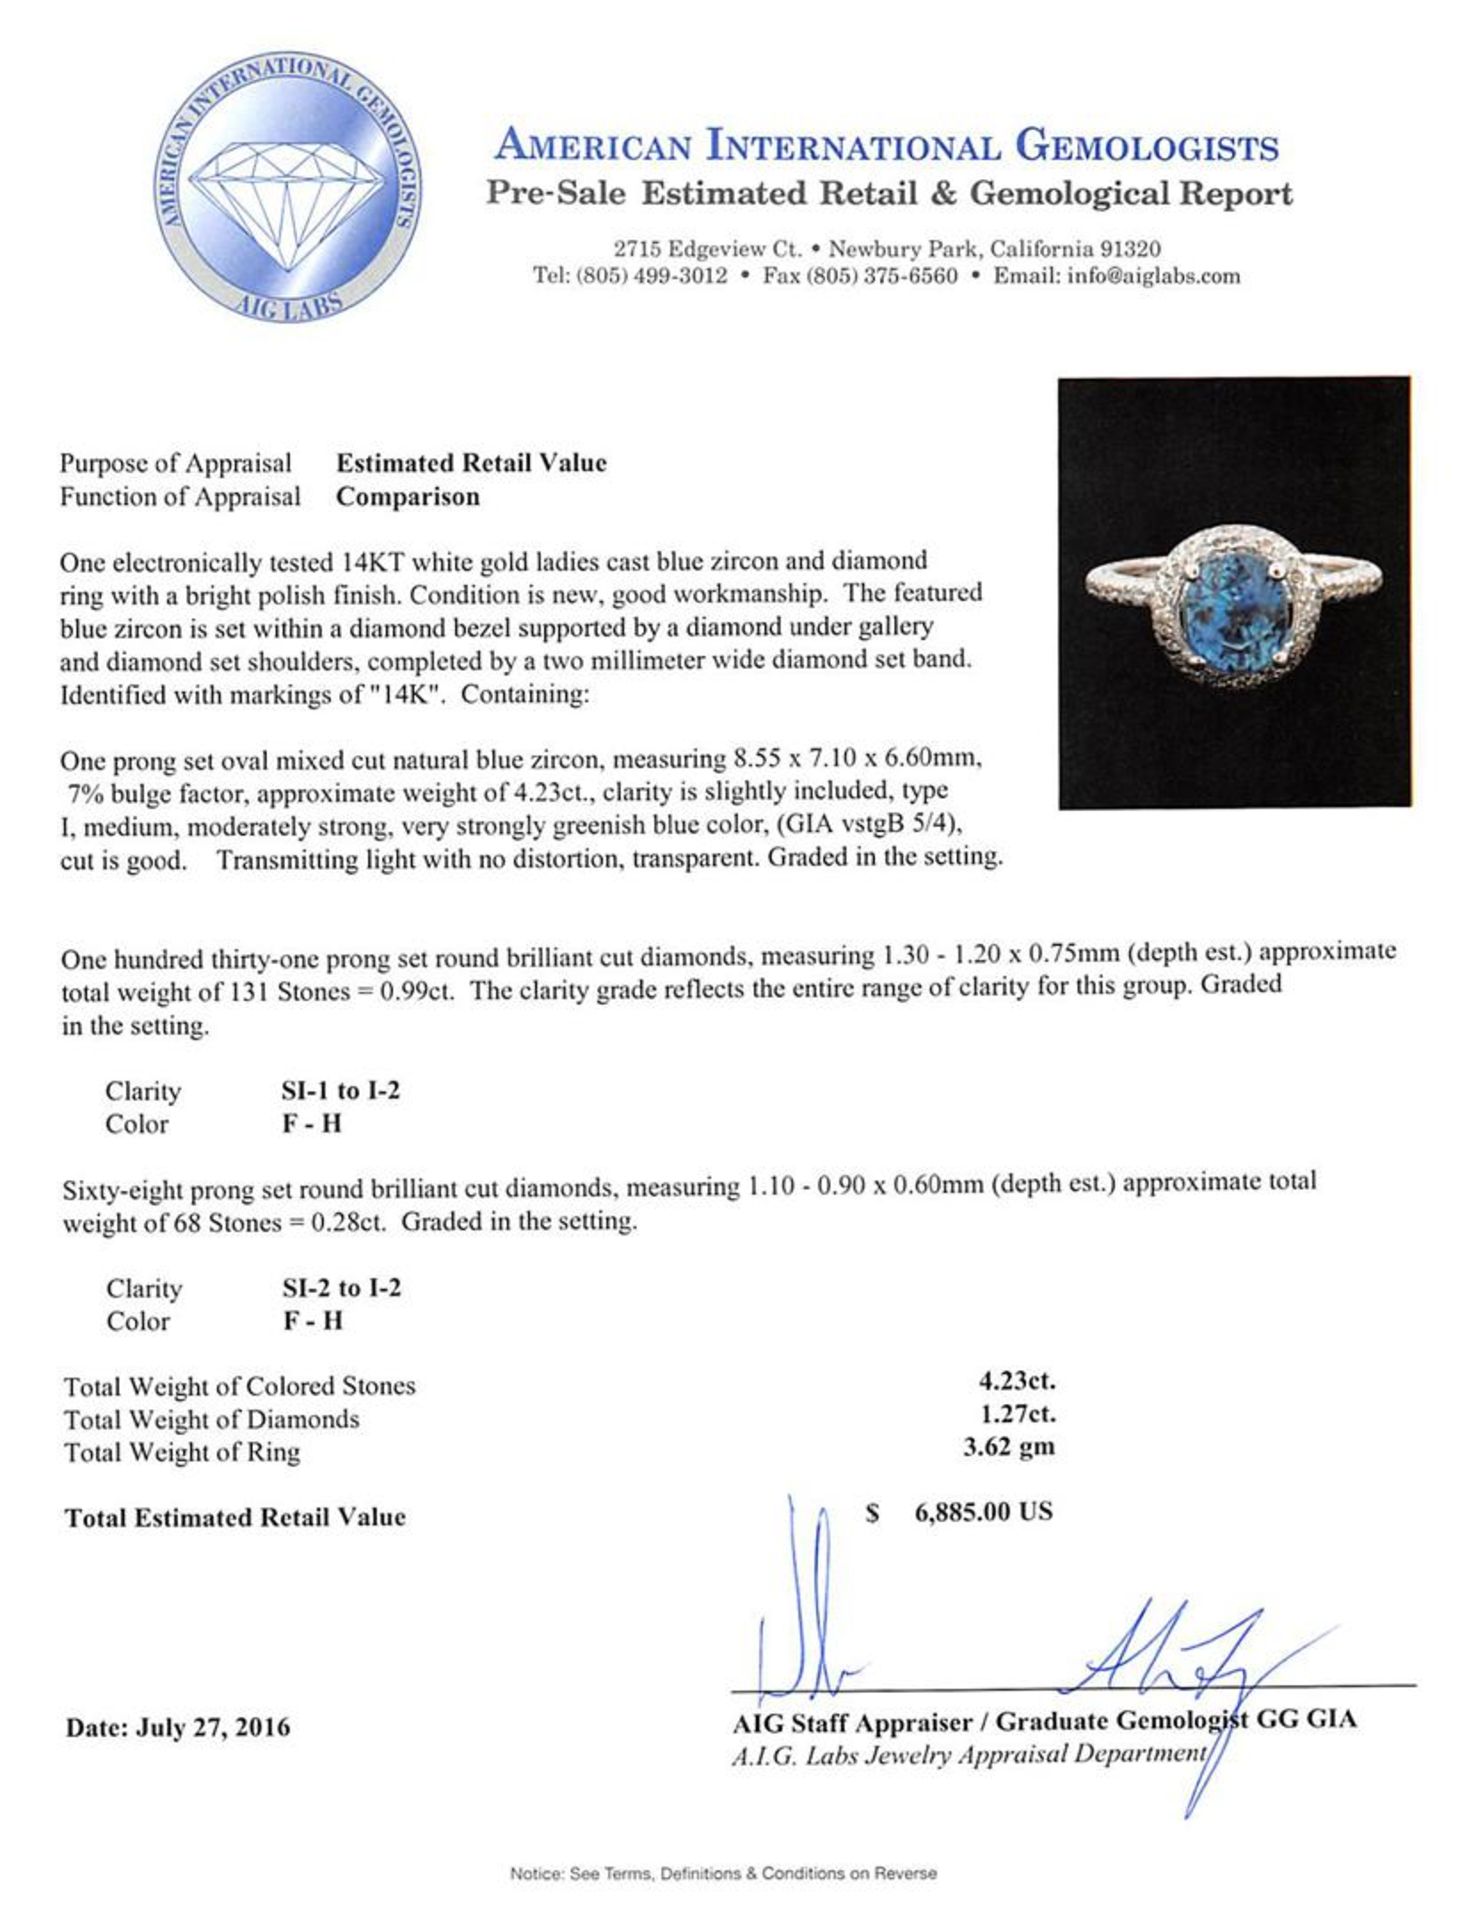 4.23 ctw Blue Zircon and Diamond Ring - 14KT White Gold - Image 5 of 5